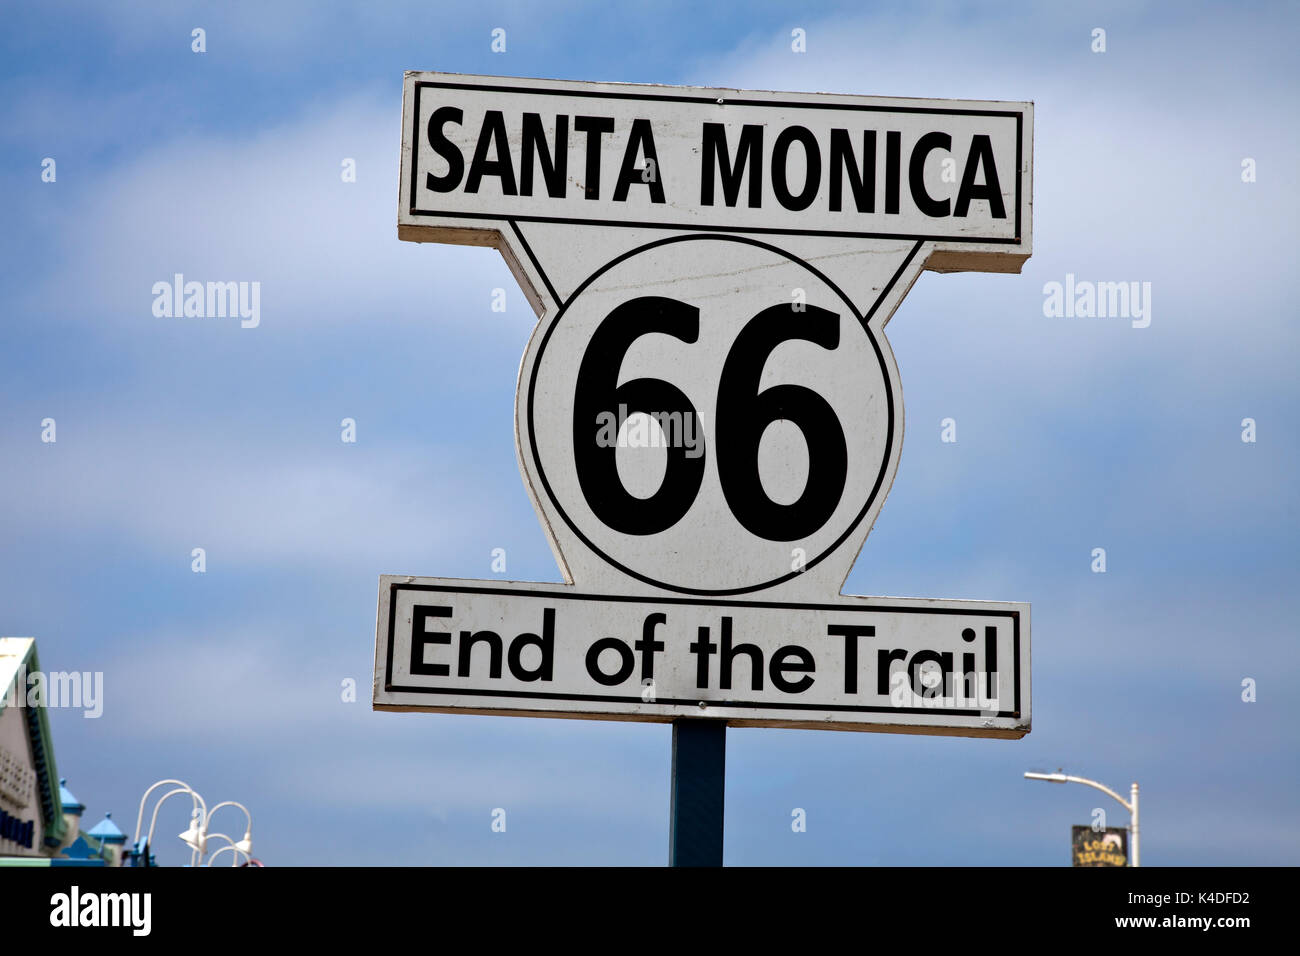 A popular excursion spot for more than a century, Southern California's Santa Monica Pier also is the western terminus of famous Route 66. Stock Photo